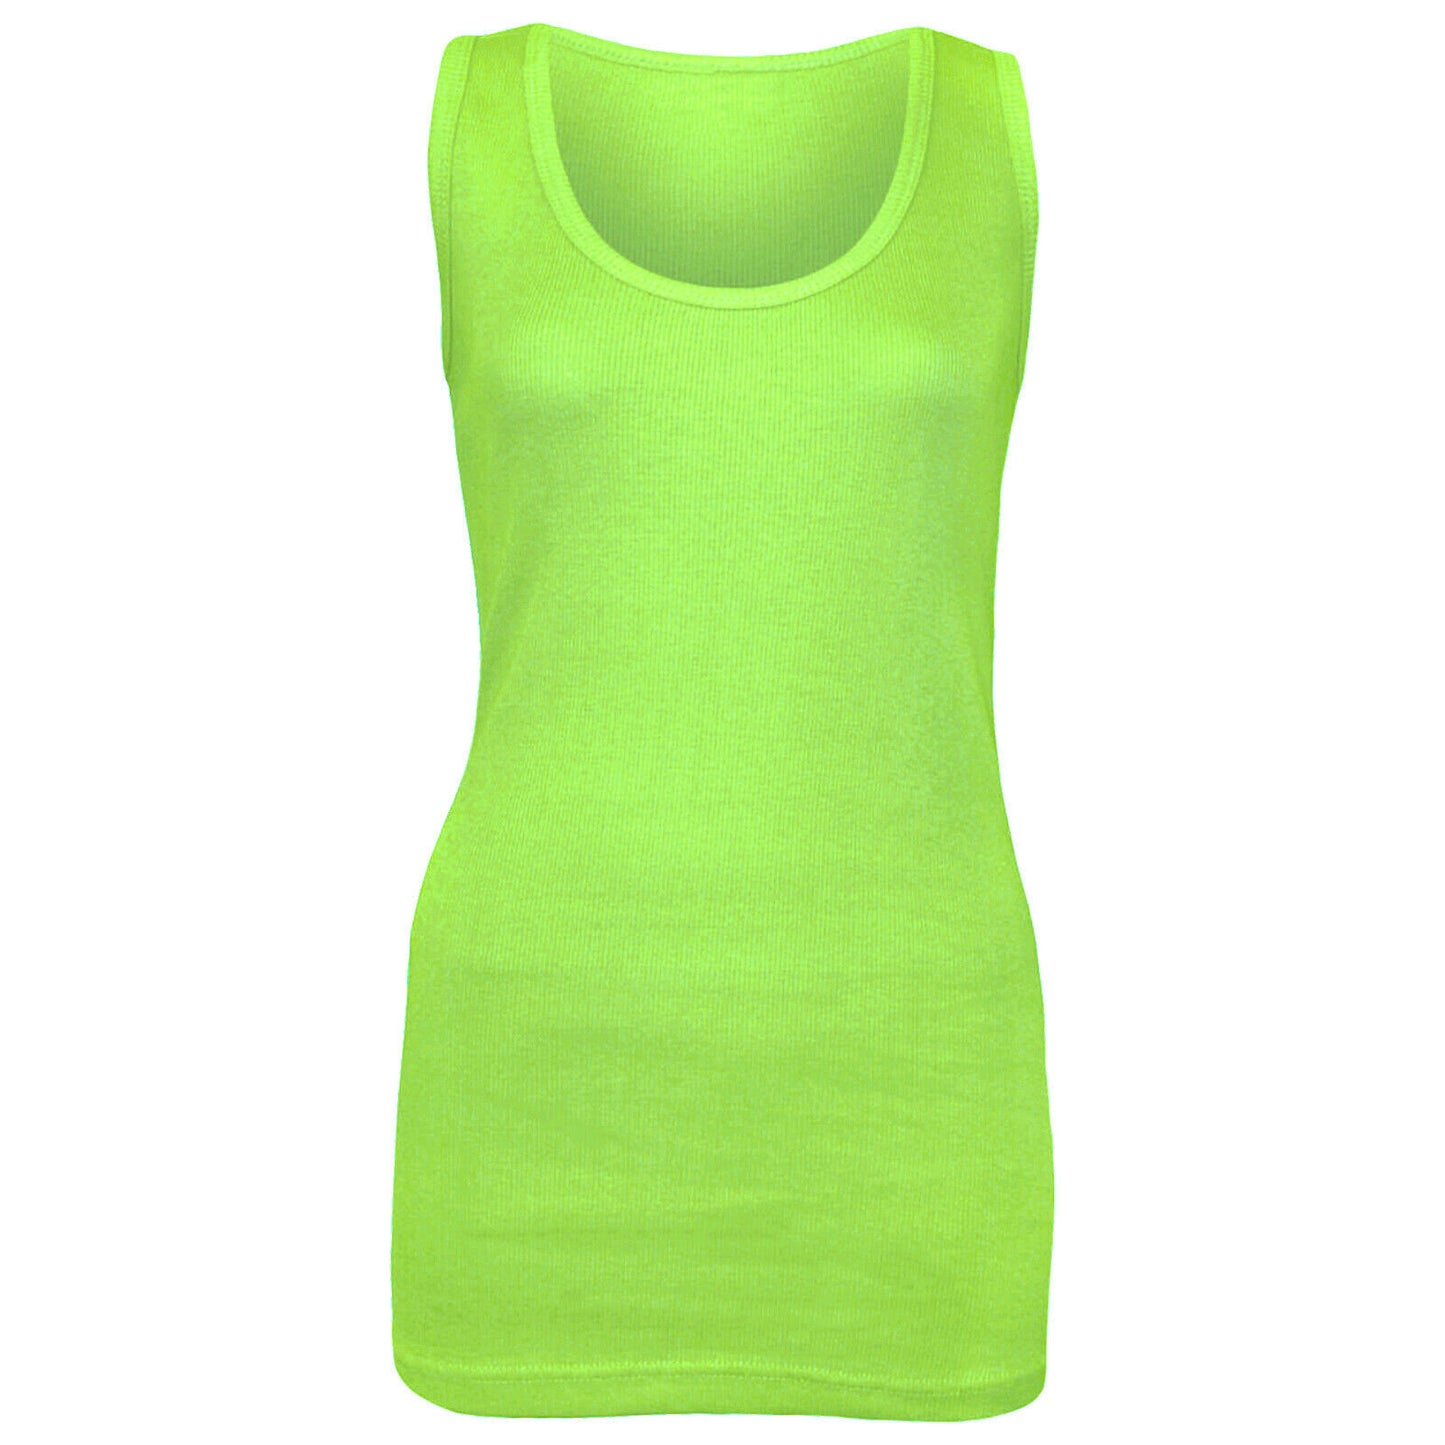 NEW LADIES WOMENS PLAIN SUMMER STRETCHY RIBBED CASUAL TOP T SHIRT MUSCLE VEST